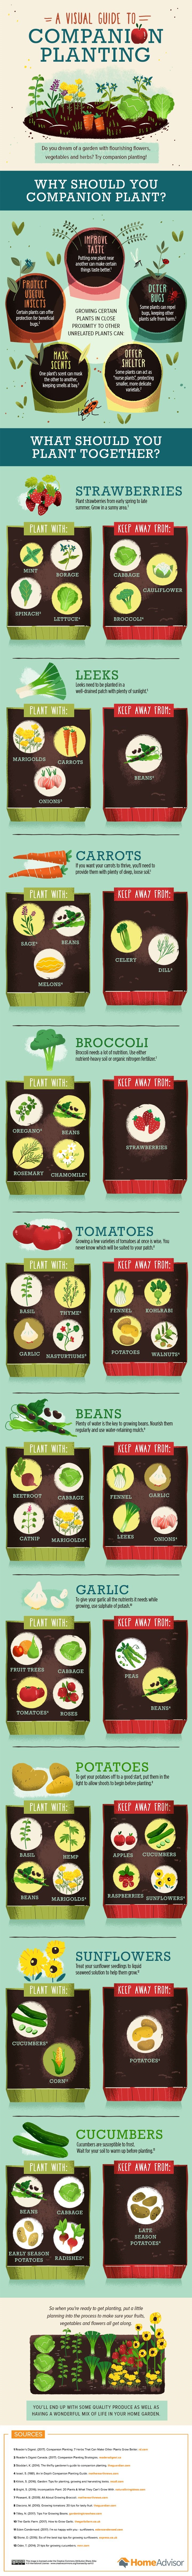 10 Companion Planting Tips & Guide